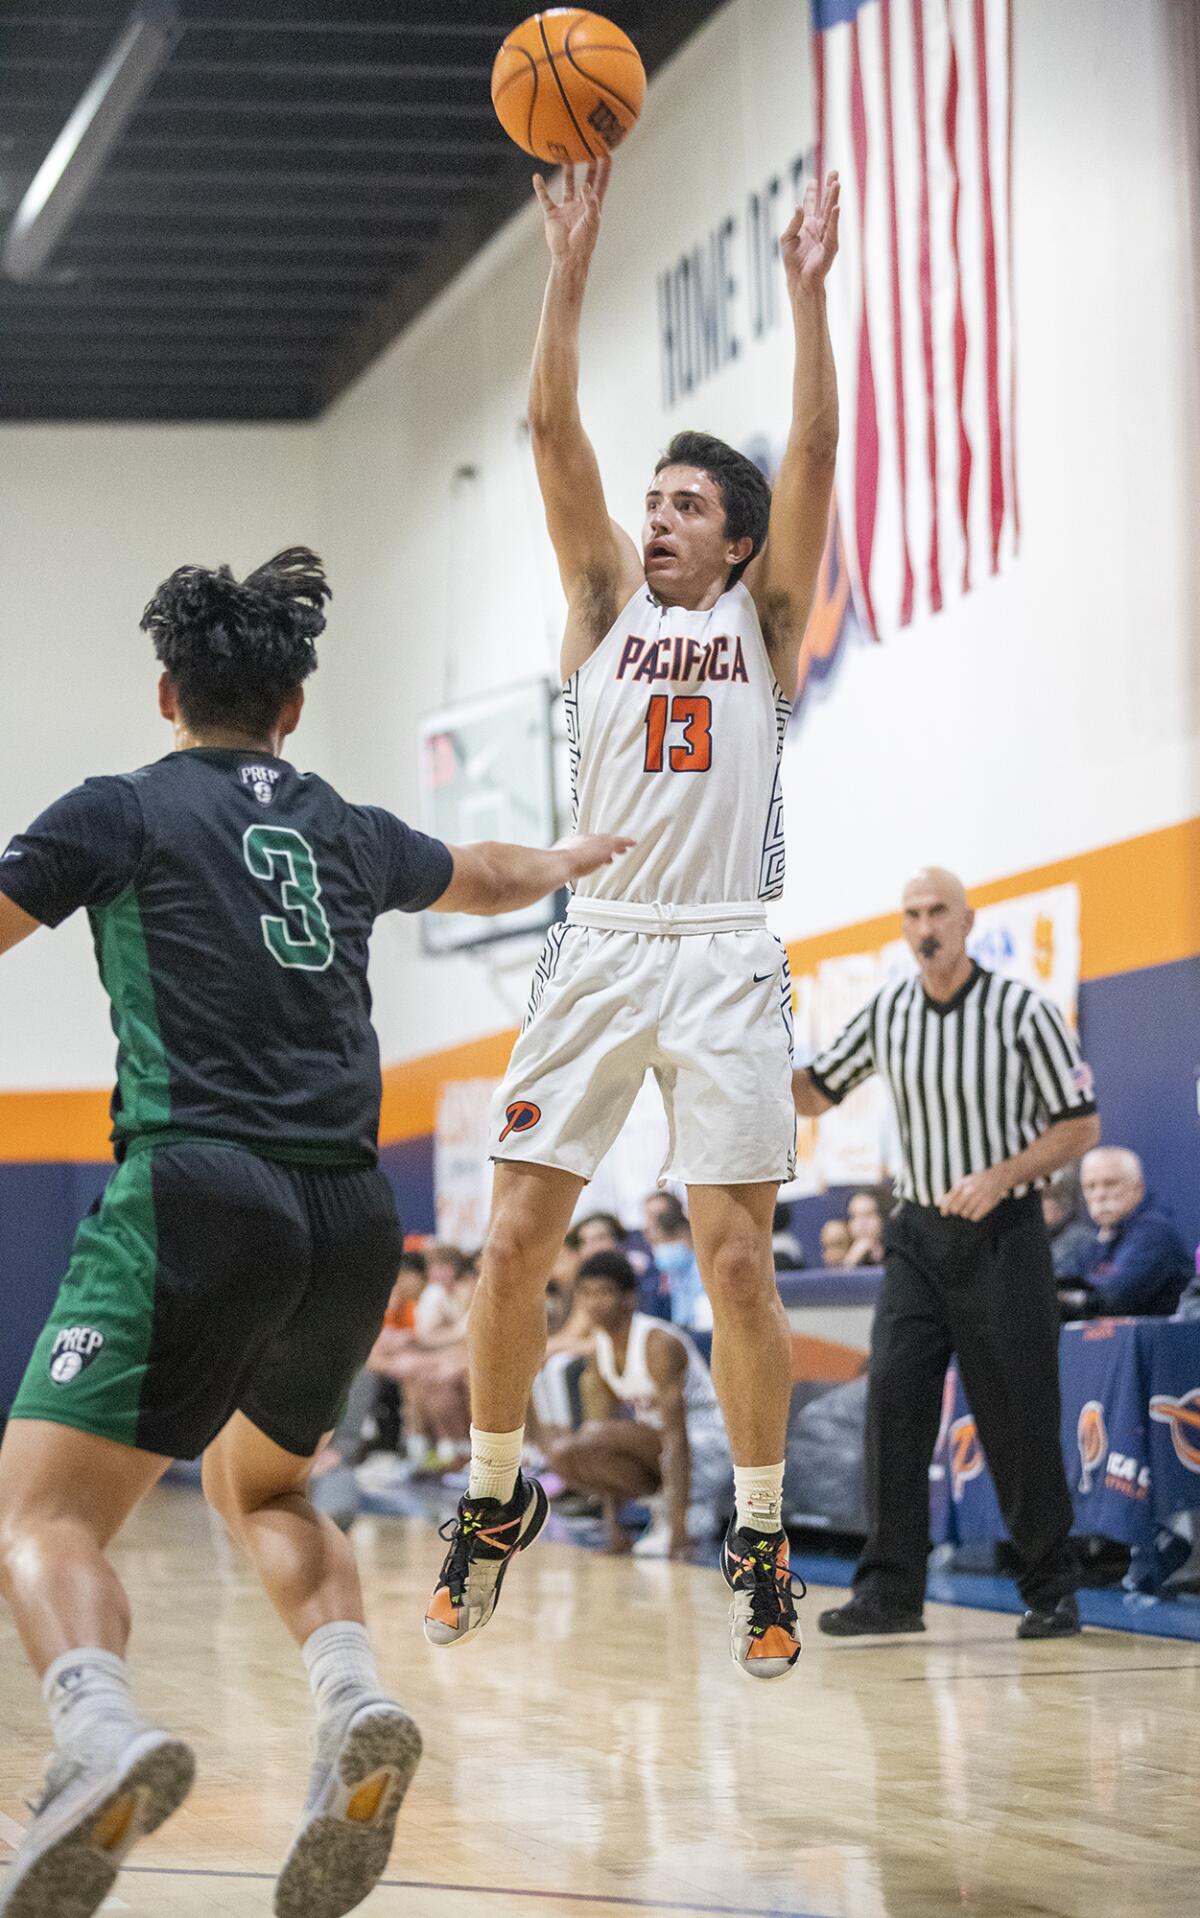 Pacifica Christian Orange County's Tanner Deal takes a shot over Fairmont Prep's Myles Che during a San Joaquin League game.